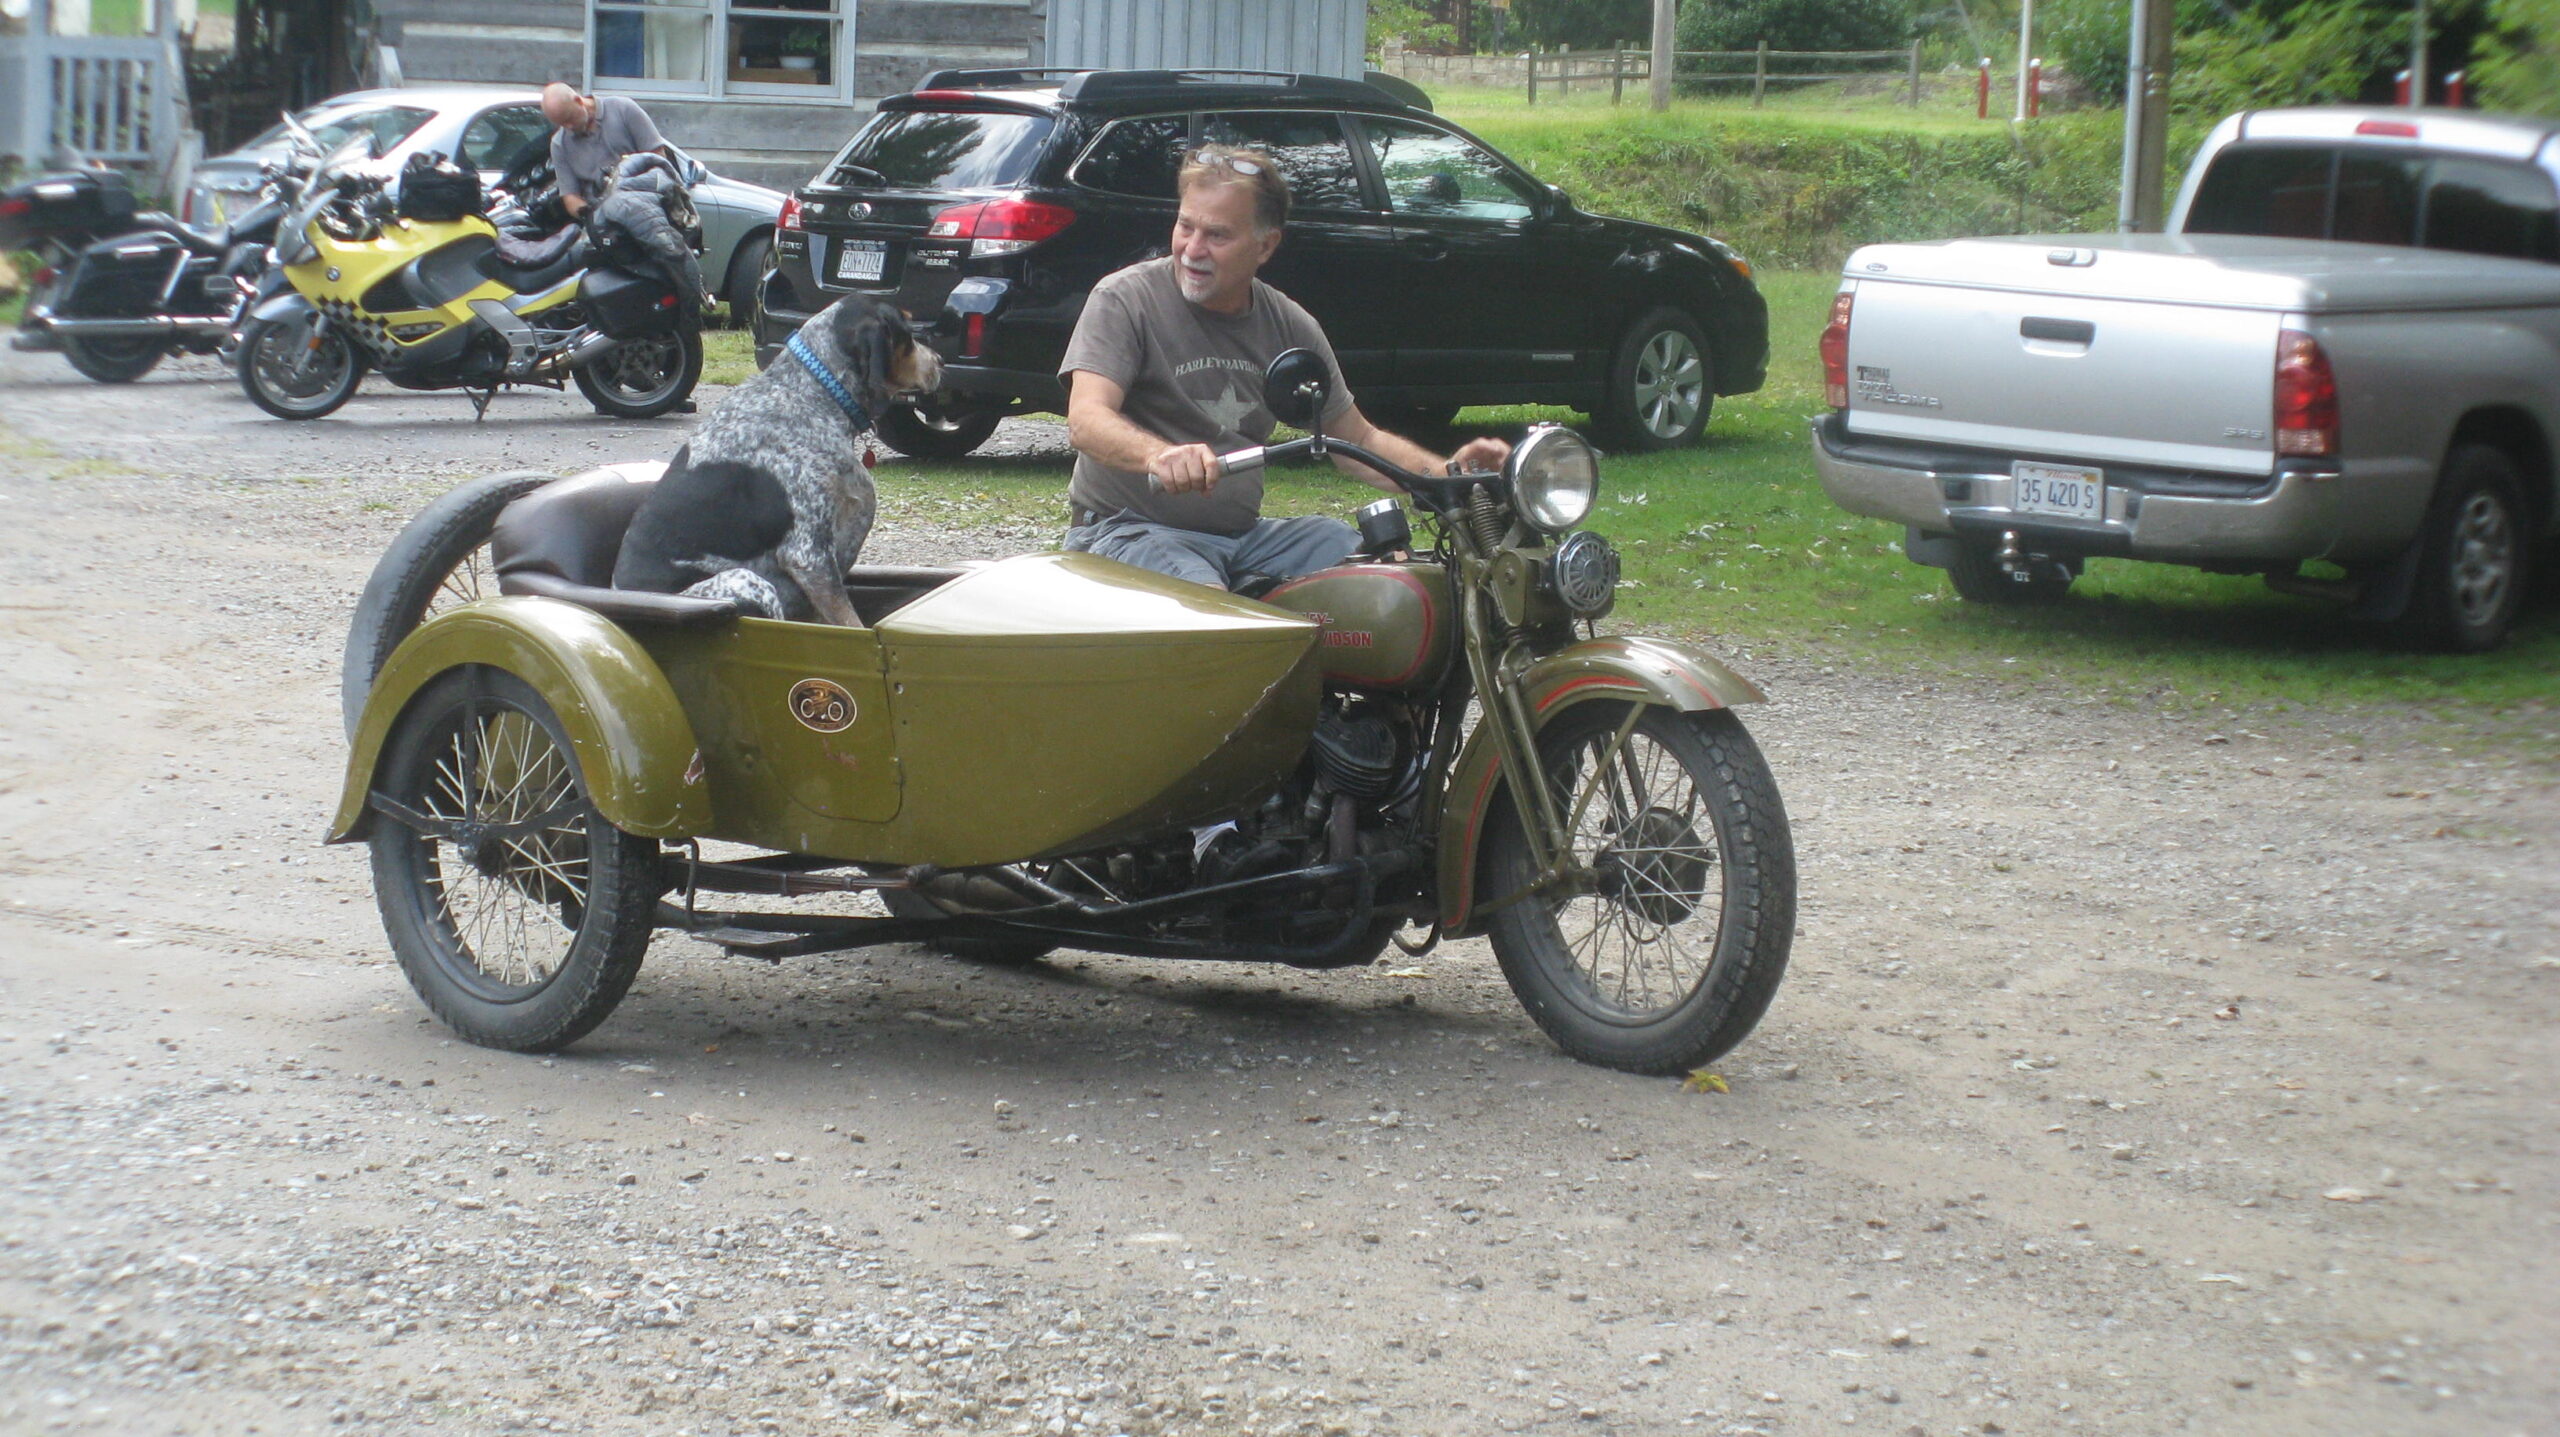 Dale and one of his dogs riding sidecar at Wheels Through Time Museum